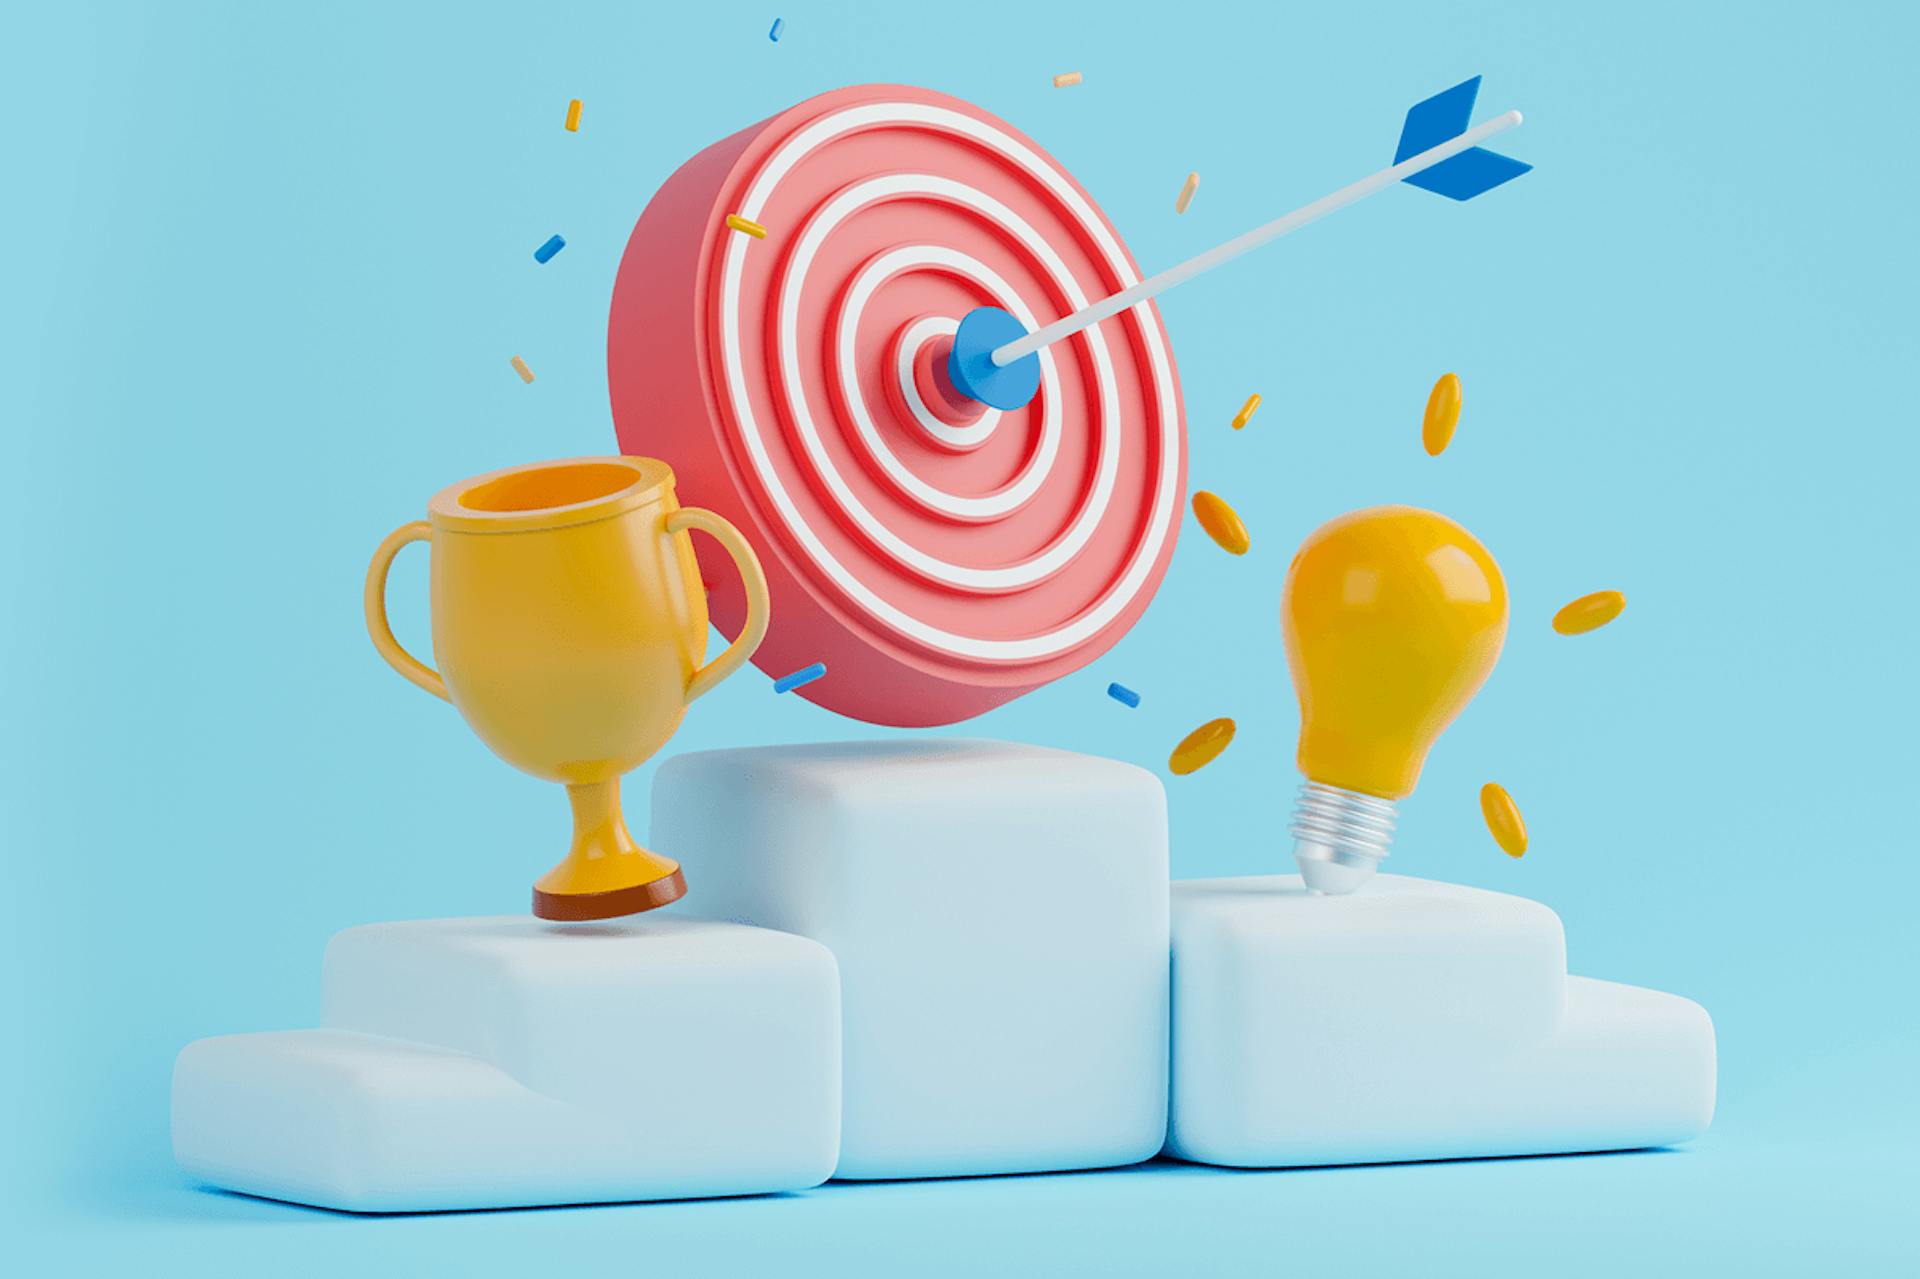 Illustration of a podium showing a red target with an arrow in the bullseye in the center, yellow light bulb and trophy cup on either side. Blog post on creating a successful marketing strategy.